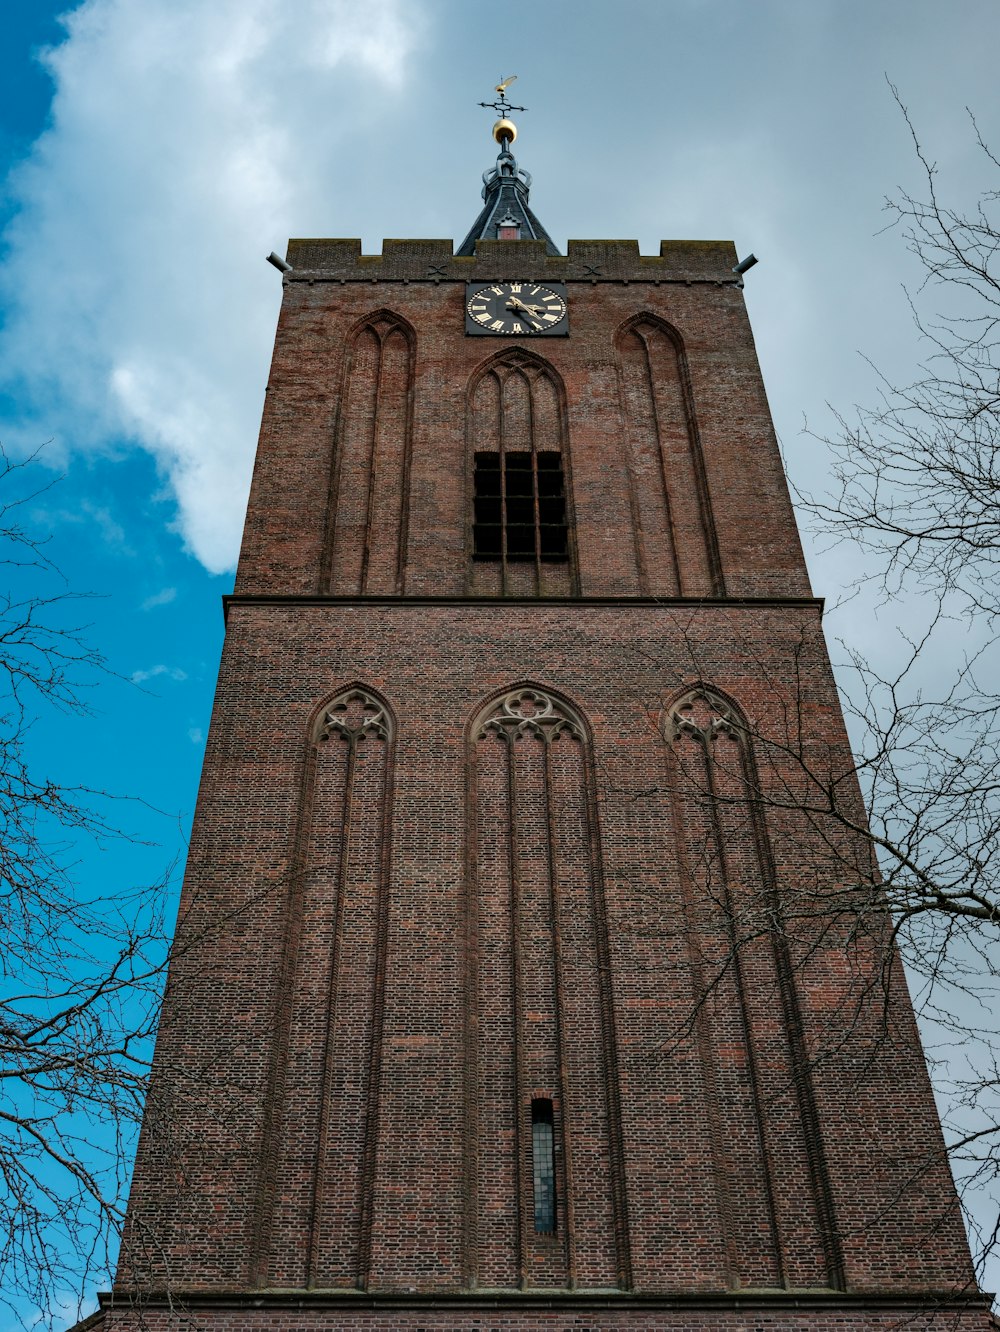 a tall brick tower with a clock on the top